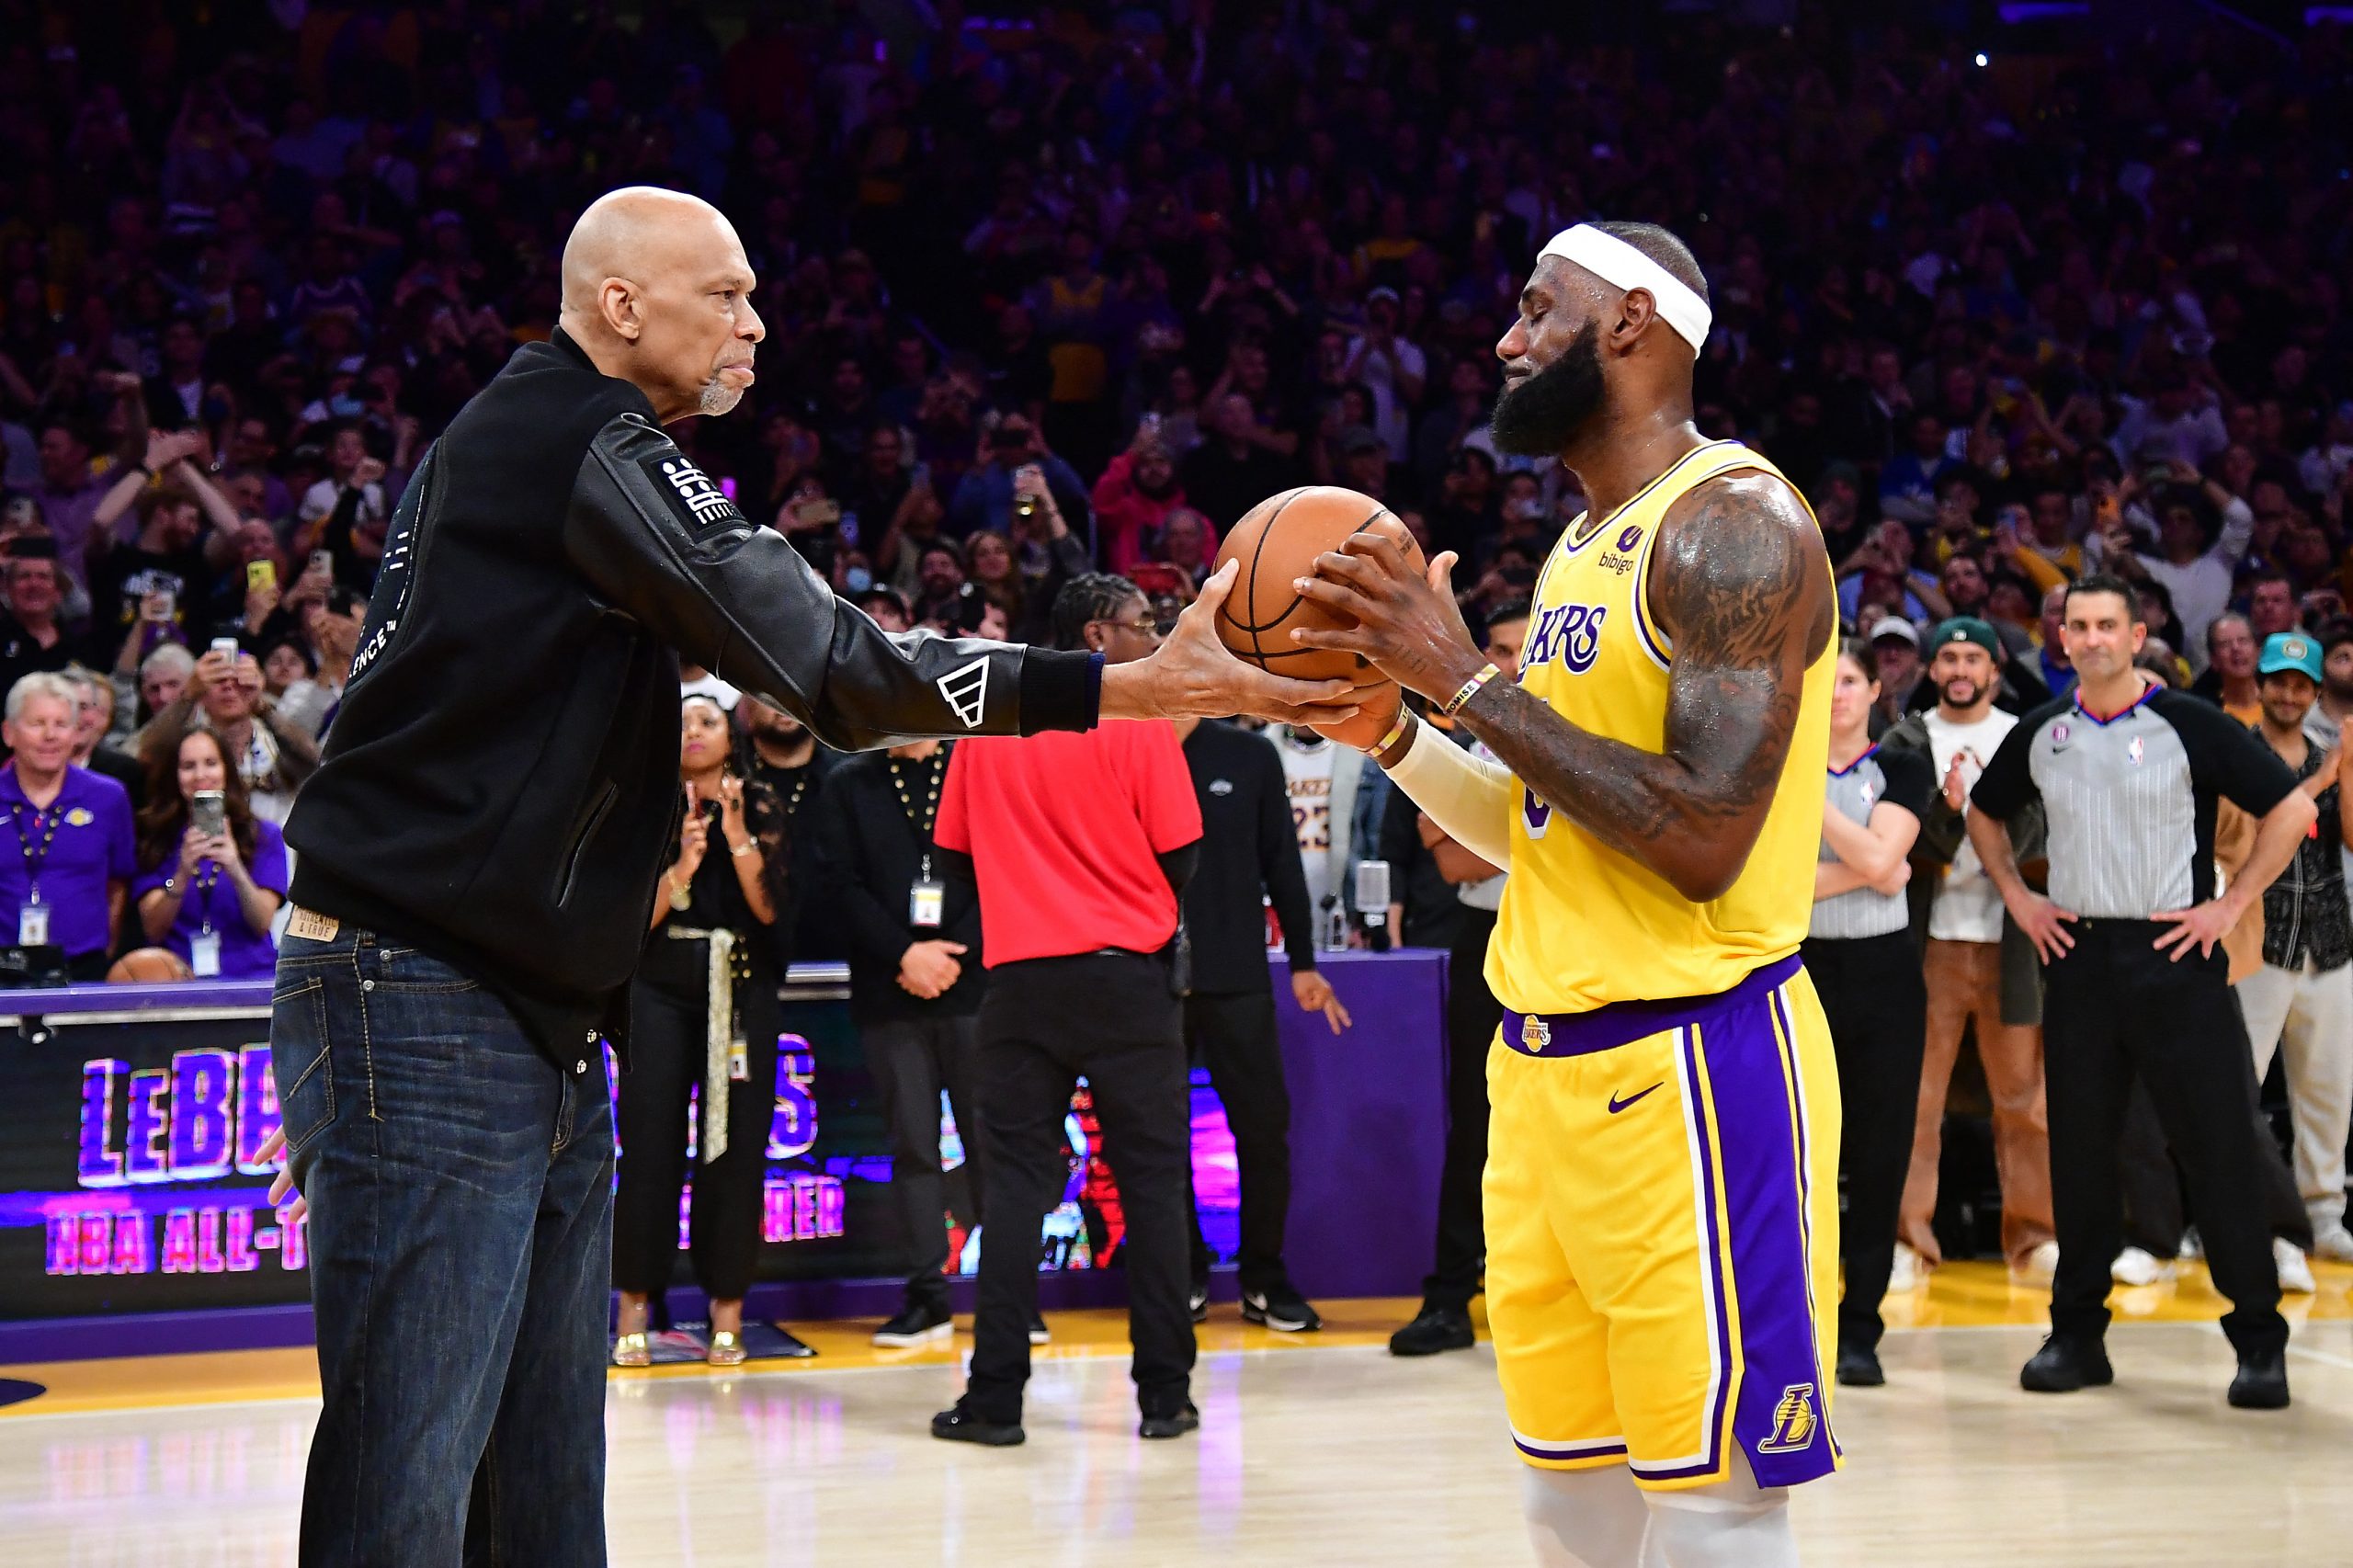 Feb 7, 2023; Los Angeles, California, USA; Former Los Angeles Lakers player Kareem Abdul-Jabbar hands the game ball to forward LeBron James (6) after James becomes the NBA all time scoring leader against the Oklahoma City Thunder during the second half at Crypto.com Arena. Mandatory Credit: Gary A. Vasquez-USA TODAY Sports Photo: Gary A. Vasquez/REUTERS